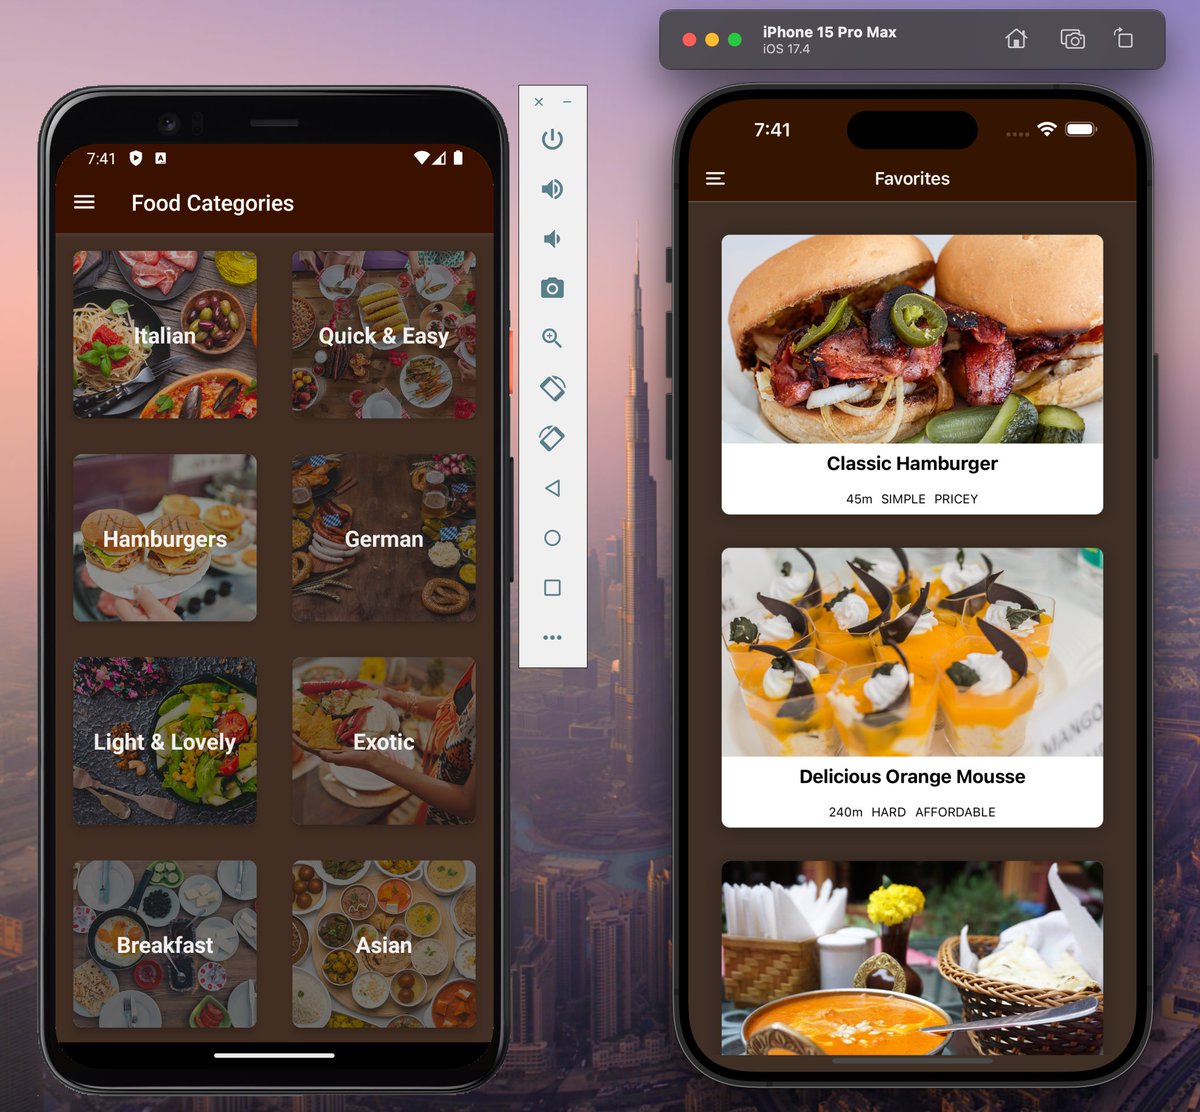 Built 'Favourite the Meal Recipe, a Mobile App'
- for both #Android and #ios

Demo Video: bit.ly/3vUzIsa

#javascript #React #ReactNative #redux  #100DaysOfCode #LearnInPublic #BuildInPublic  #mobileapplication #MobileApp #iOS17 #iPhone15 #GooglePixel #iPhone16 #ios18